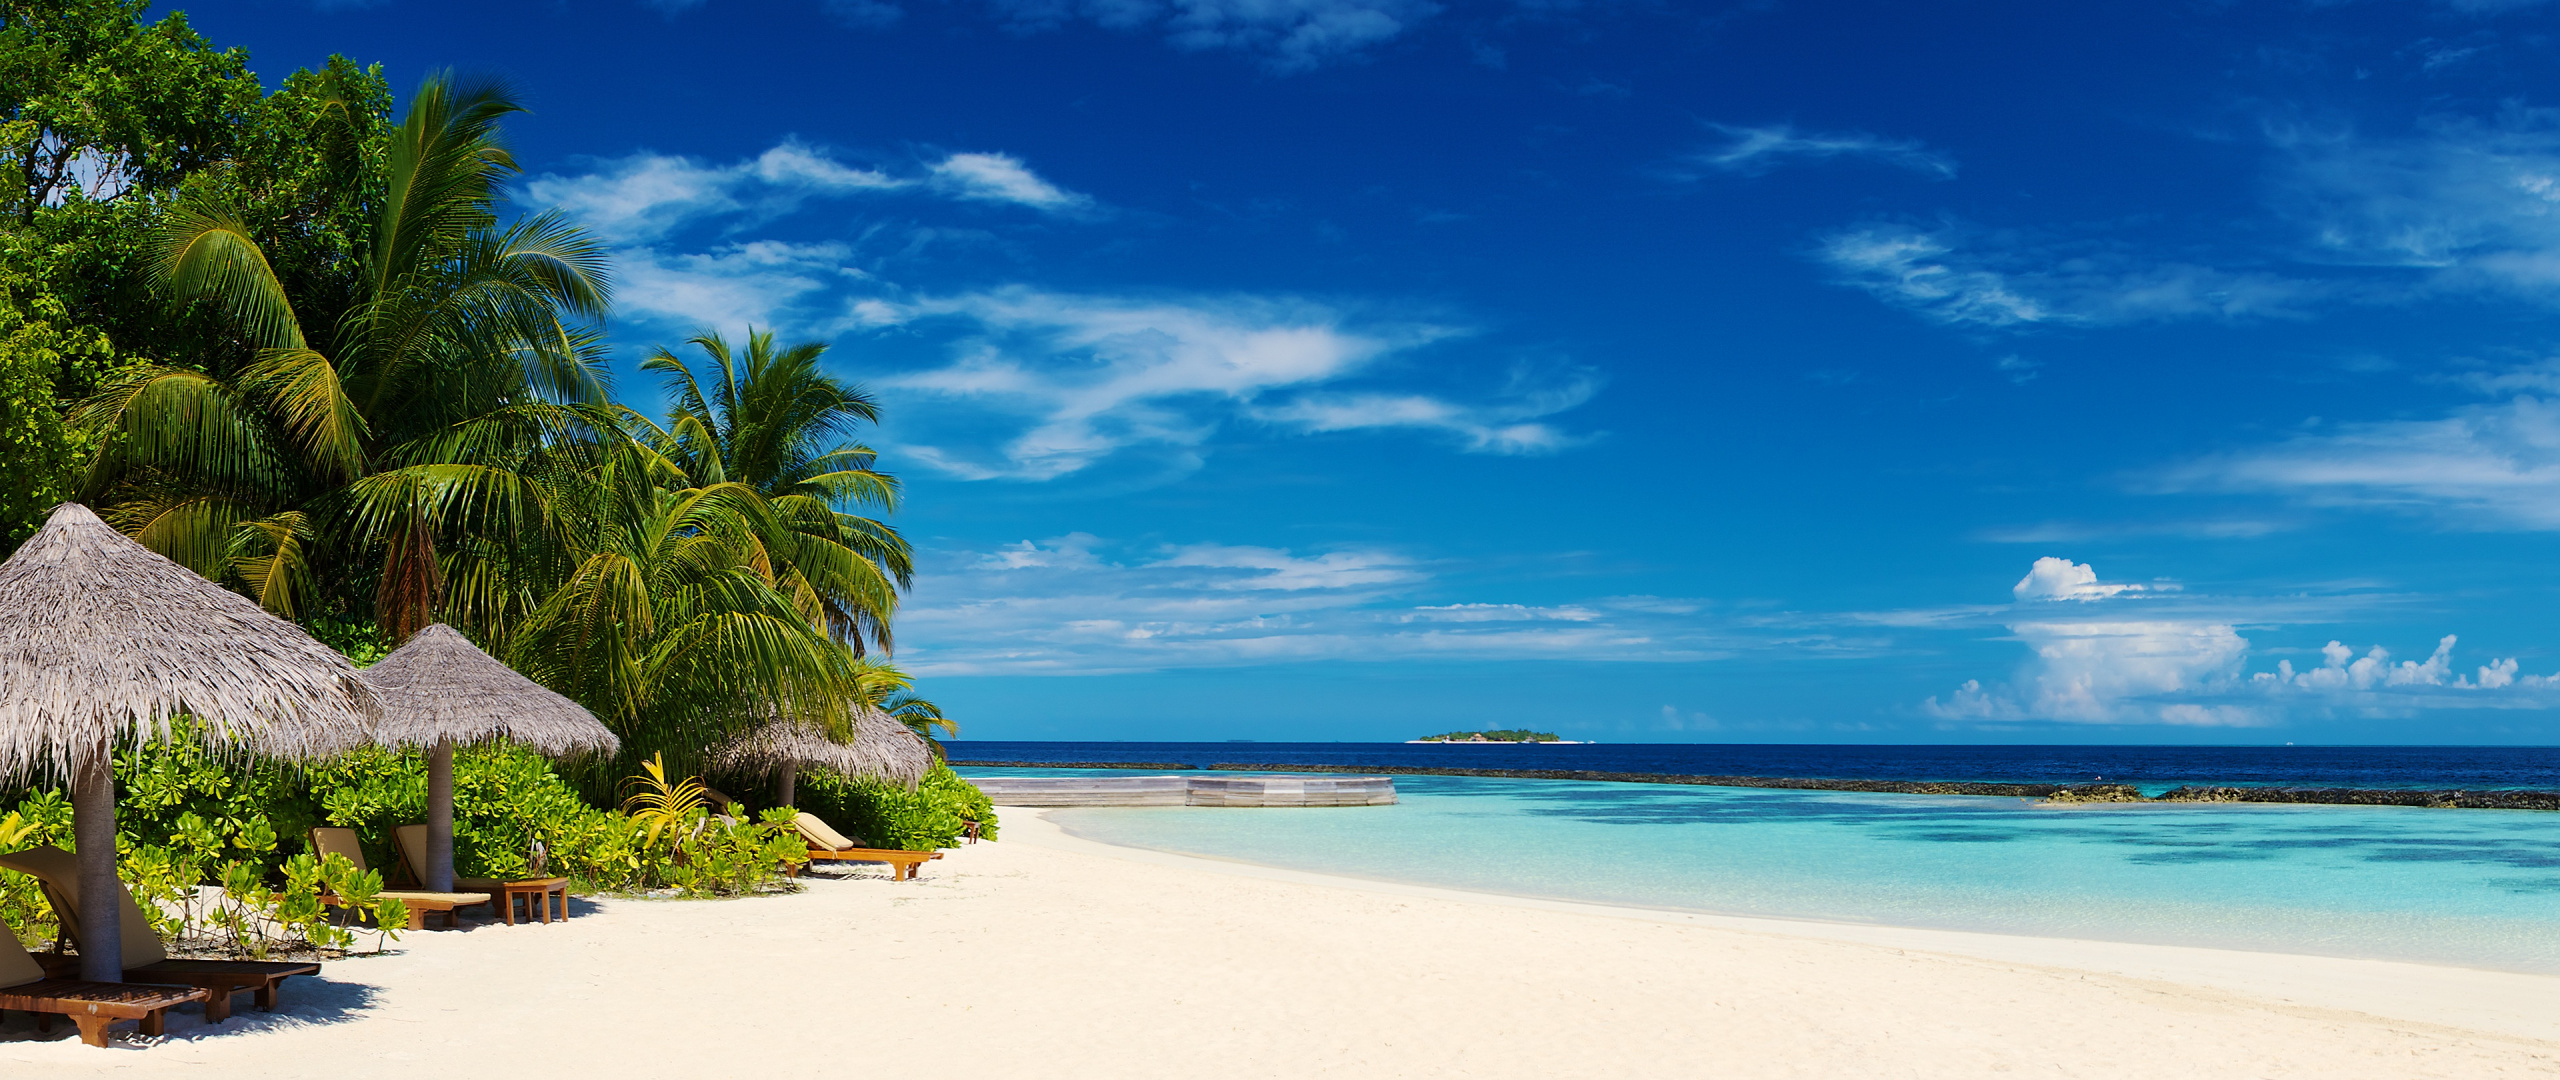 Download Tropical islands, beach, Maldives, holiday, sunny day, summer wallpaper, 2560x Dual Wide, Widescreen